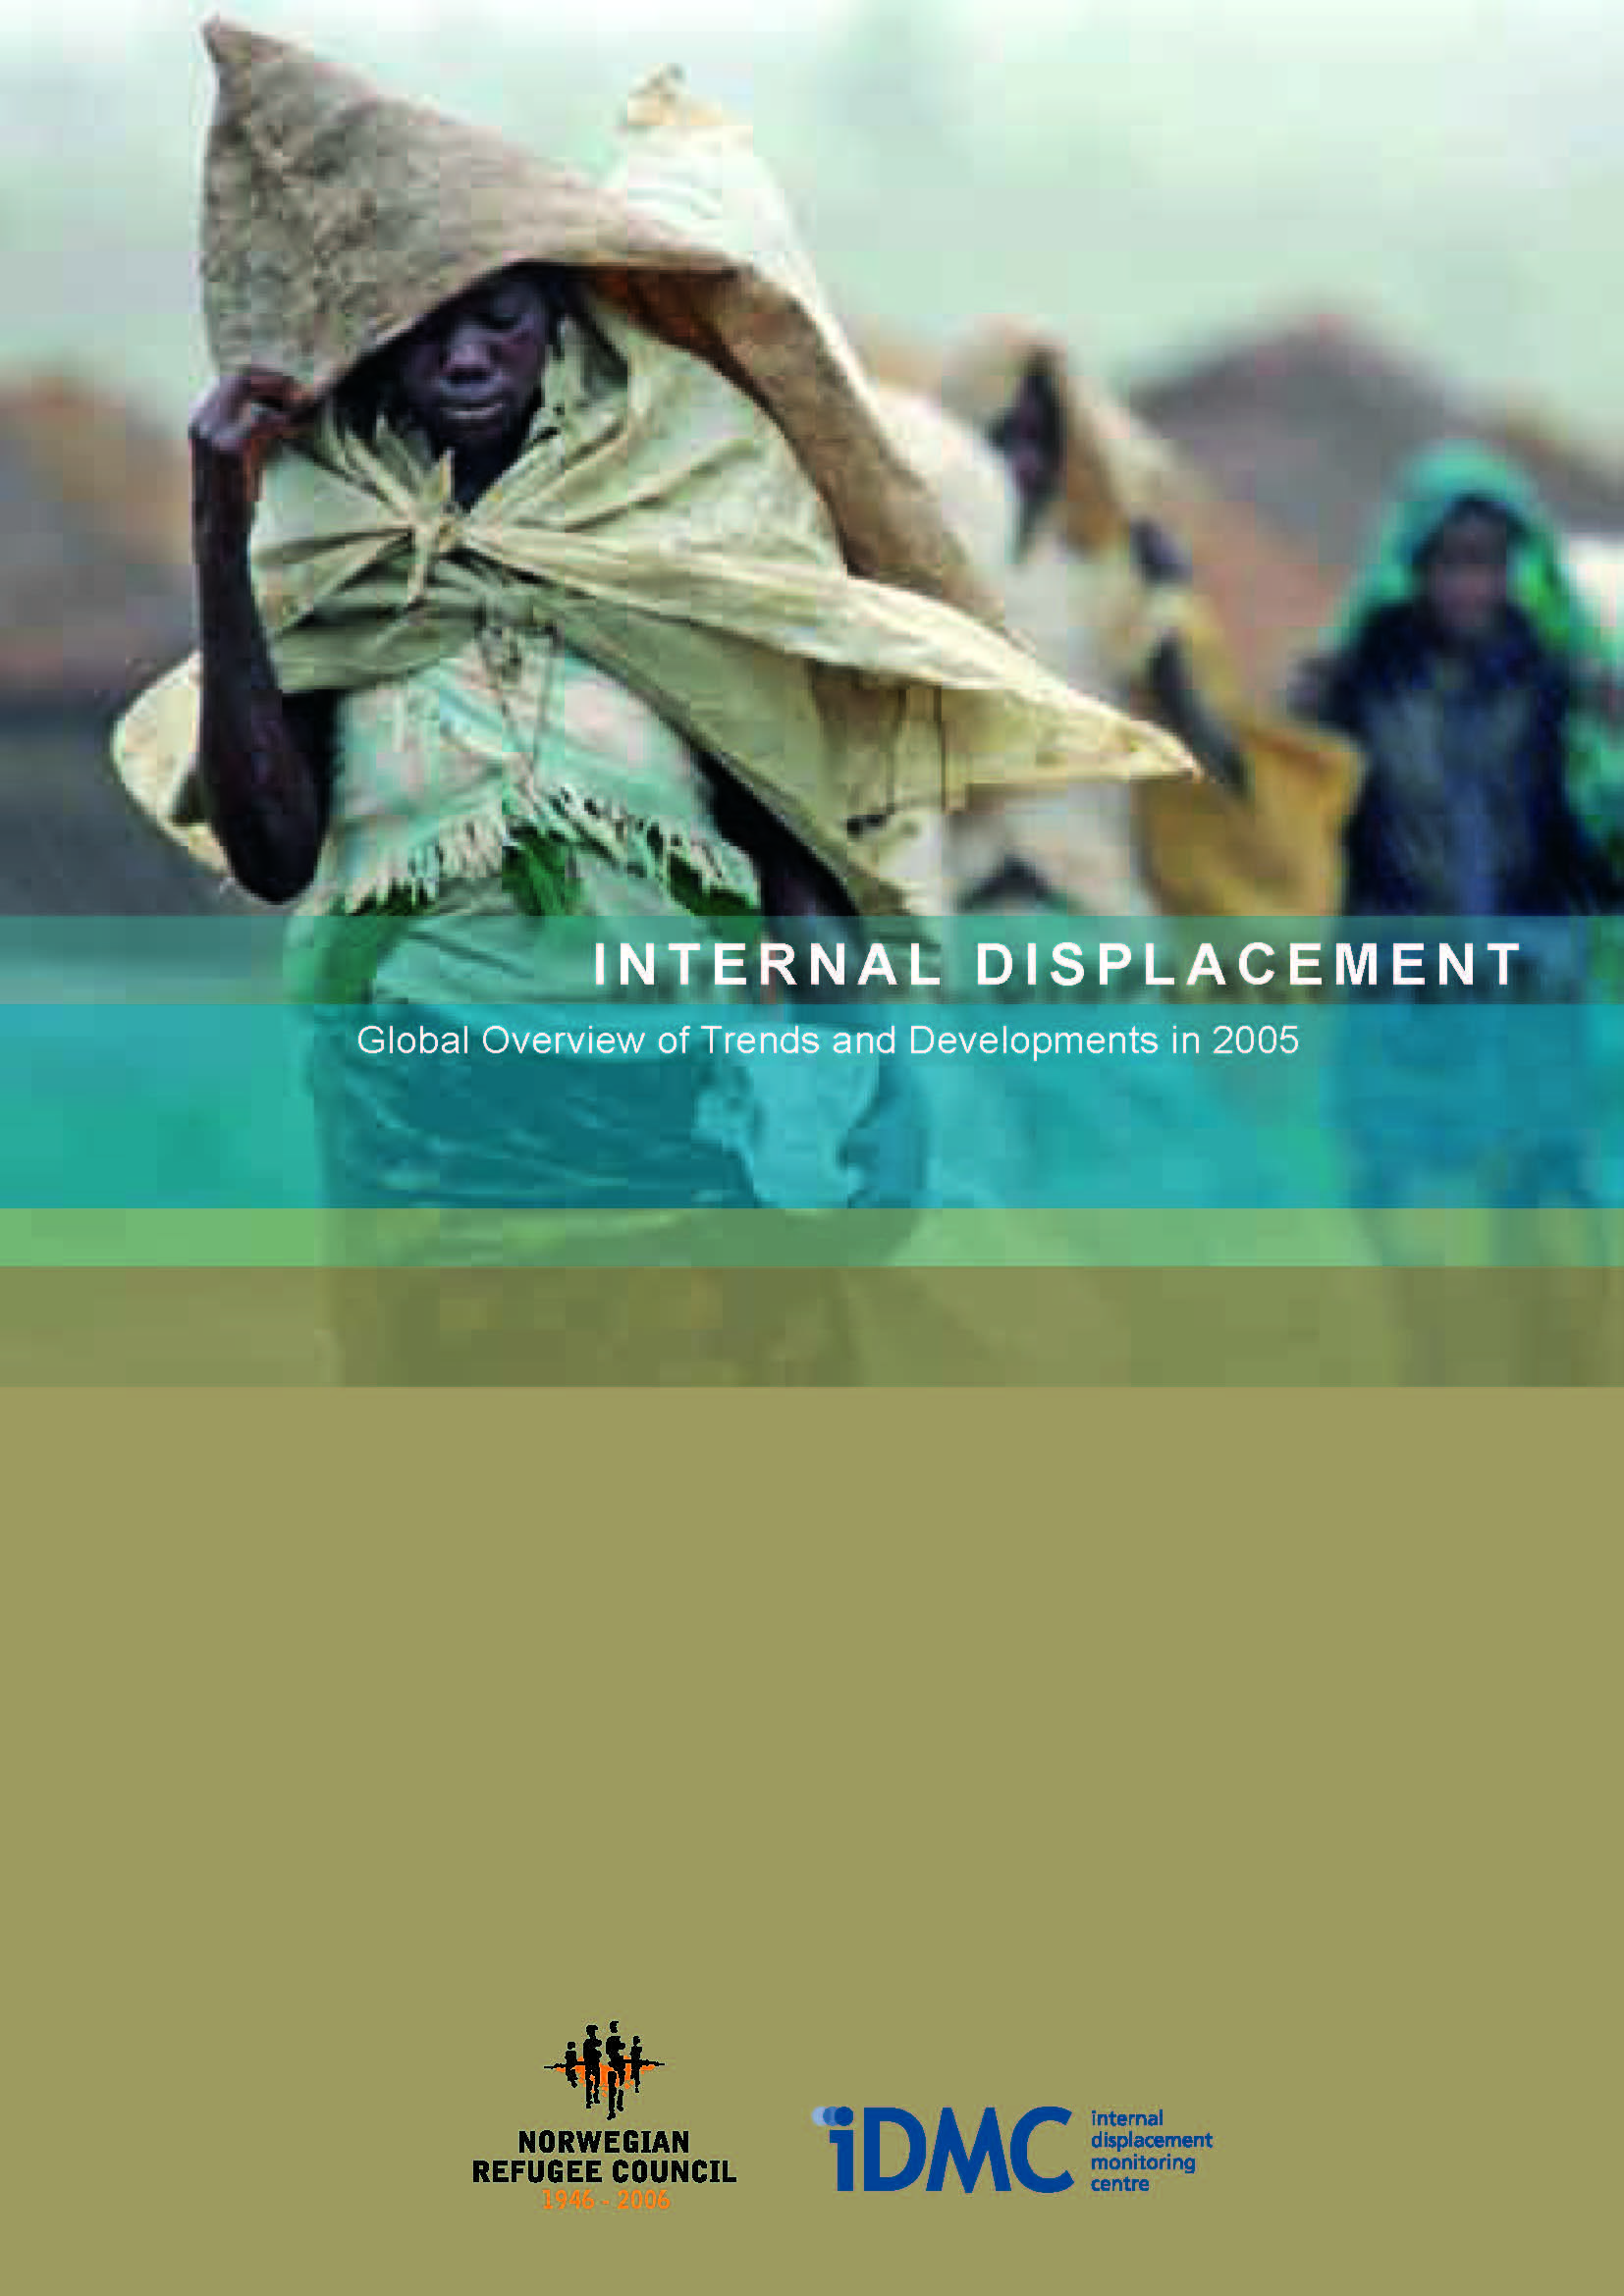 Internal Displacement: A Global Overview of Trends and Developments in 2005